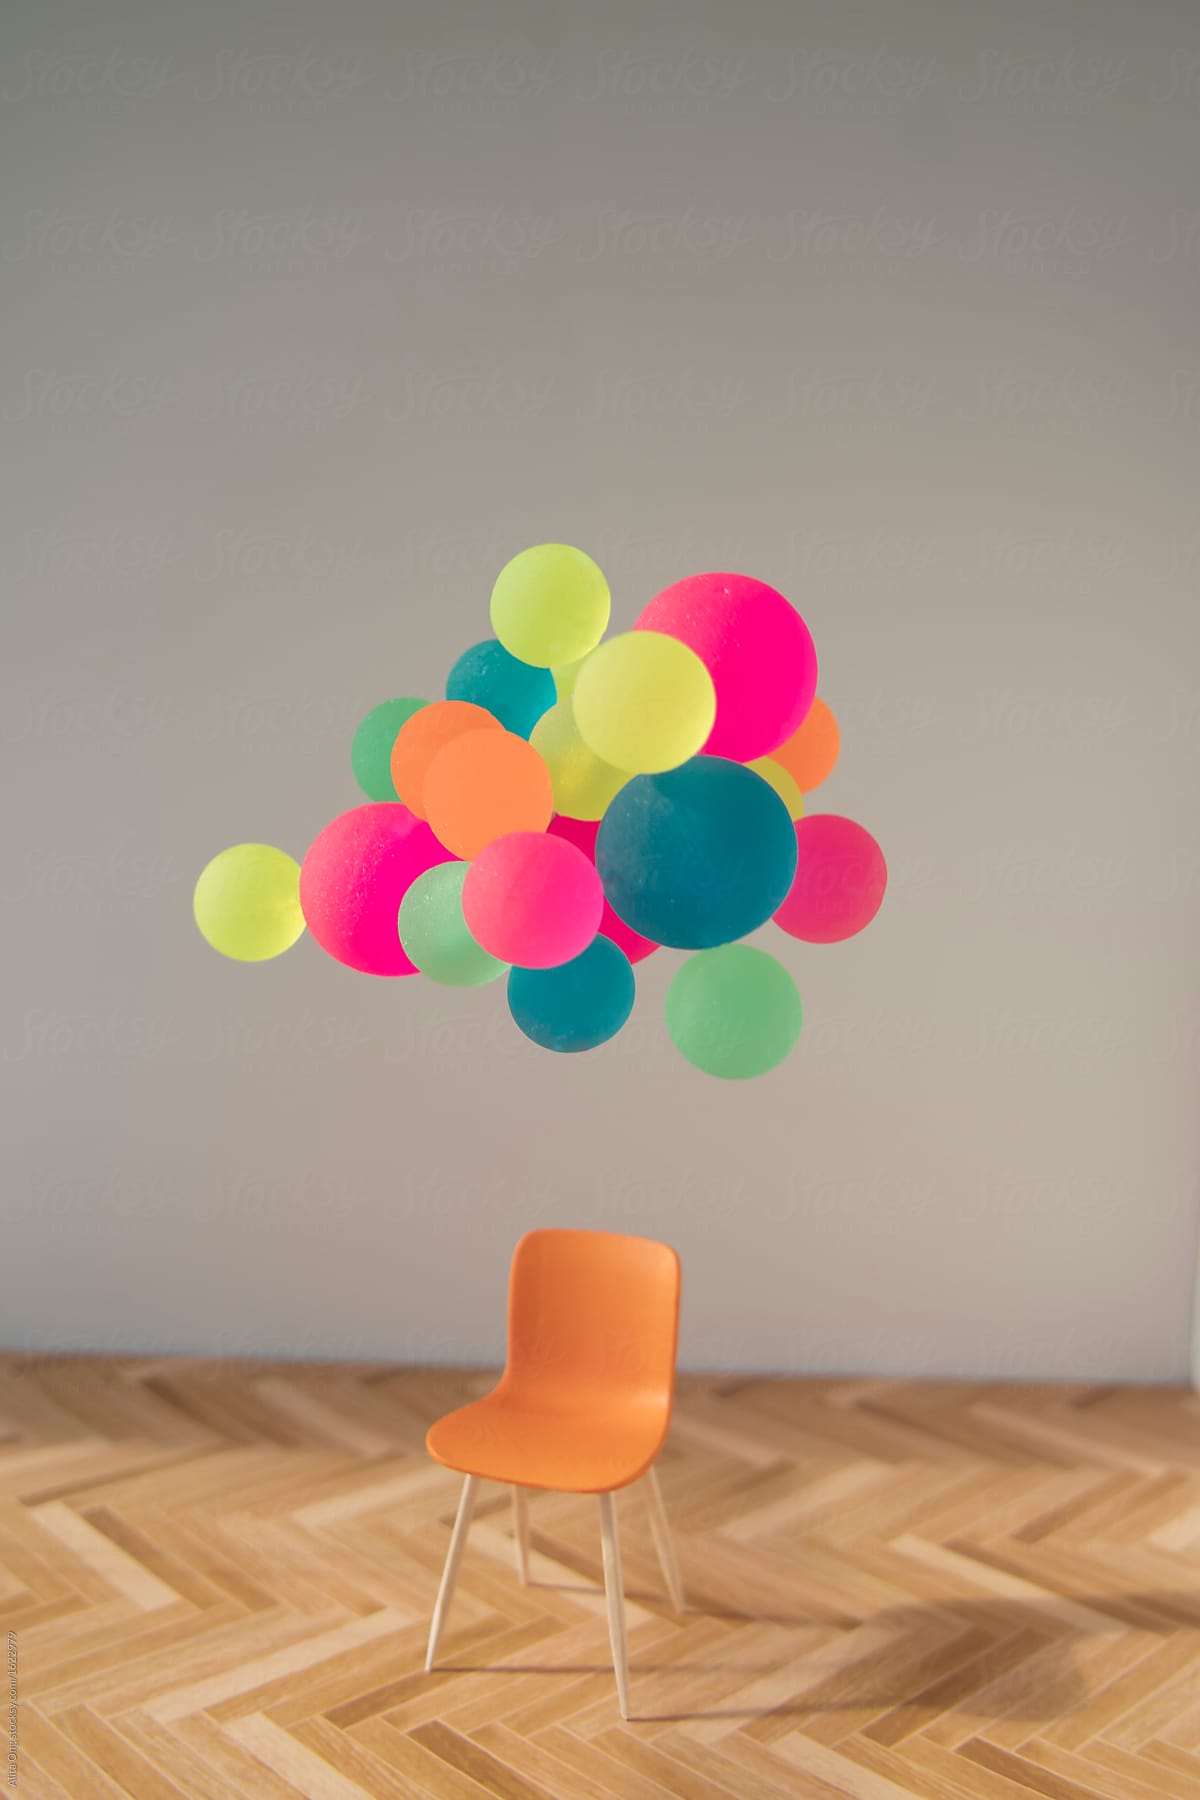 Floating objects above a single chair